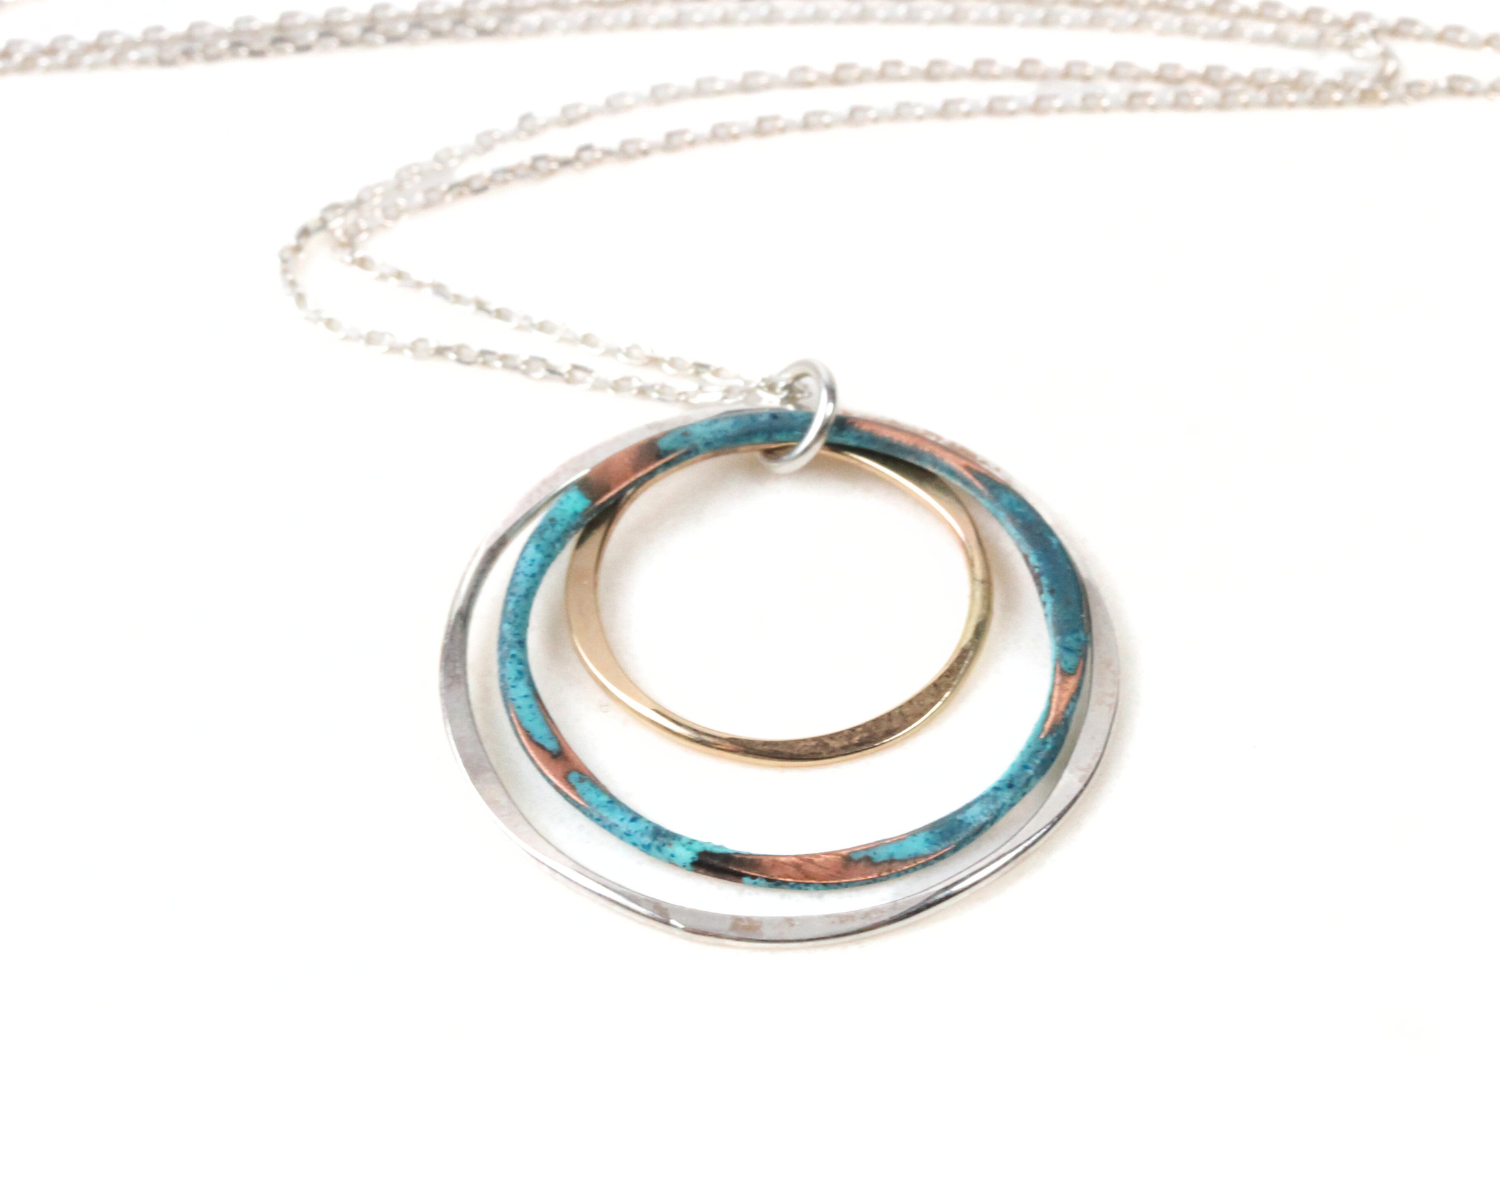 This design is lightweight and highly wearable. The mixed metal composition compliments any ensemble and the Mint patina offers an eye-catching surprise. This lively & luxurious mixed metal necklace is destined to become an instant everyday favorite